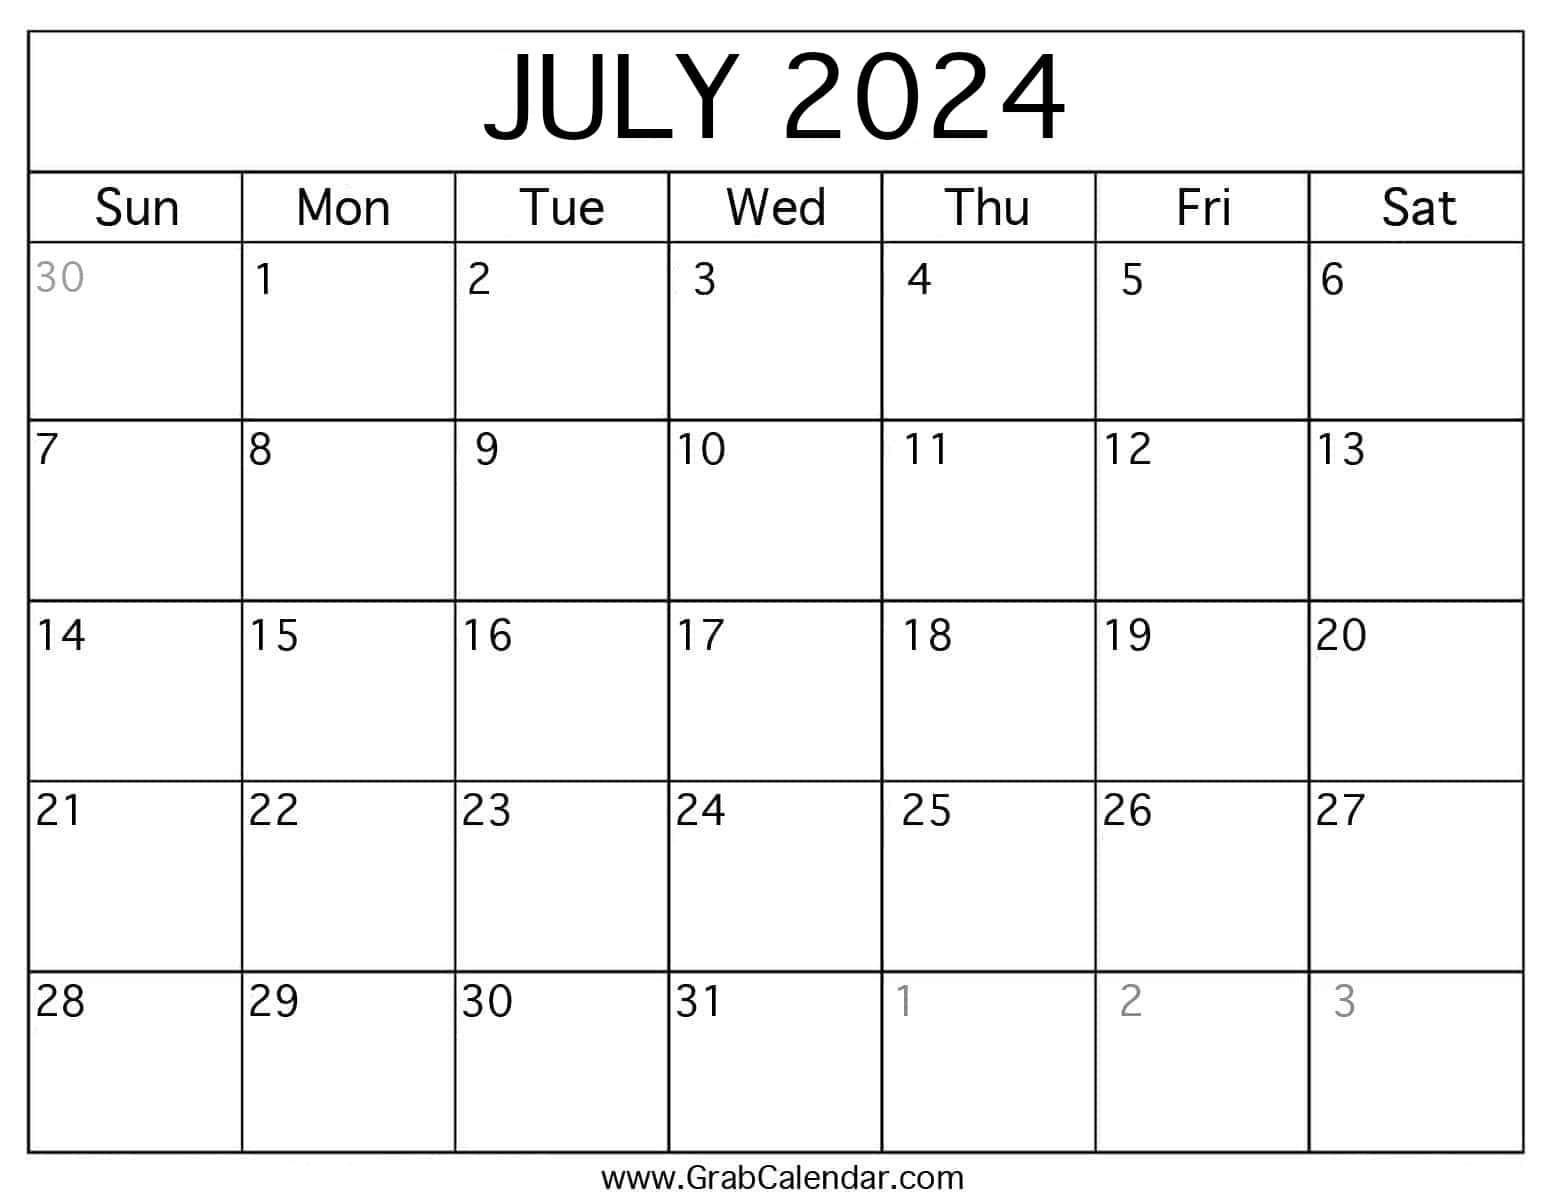 Printable July 2024 Calendar | Give Me A Calendar For The Month Of July 2024